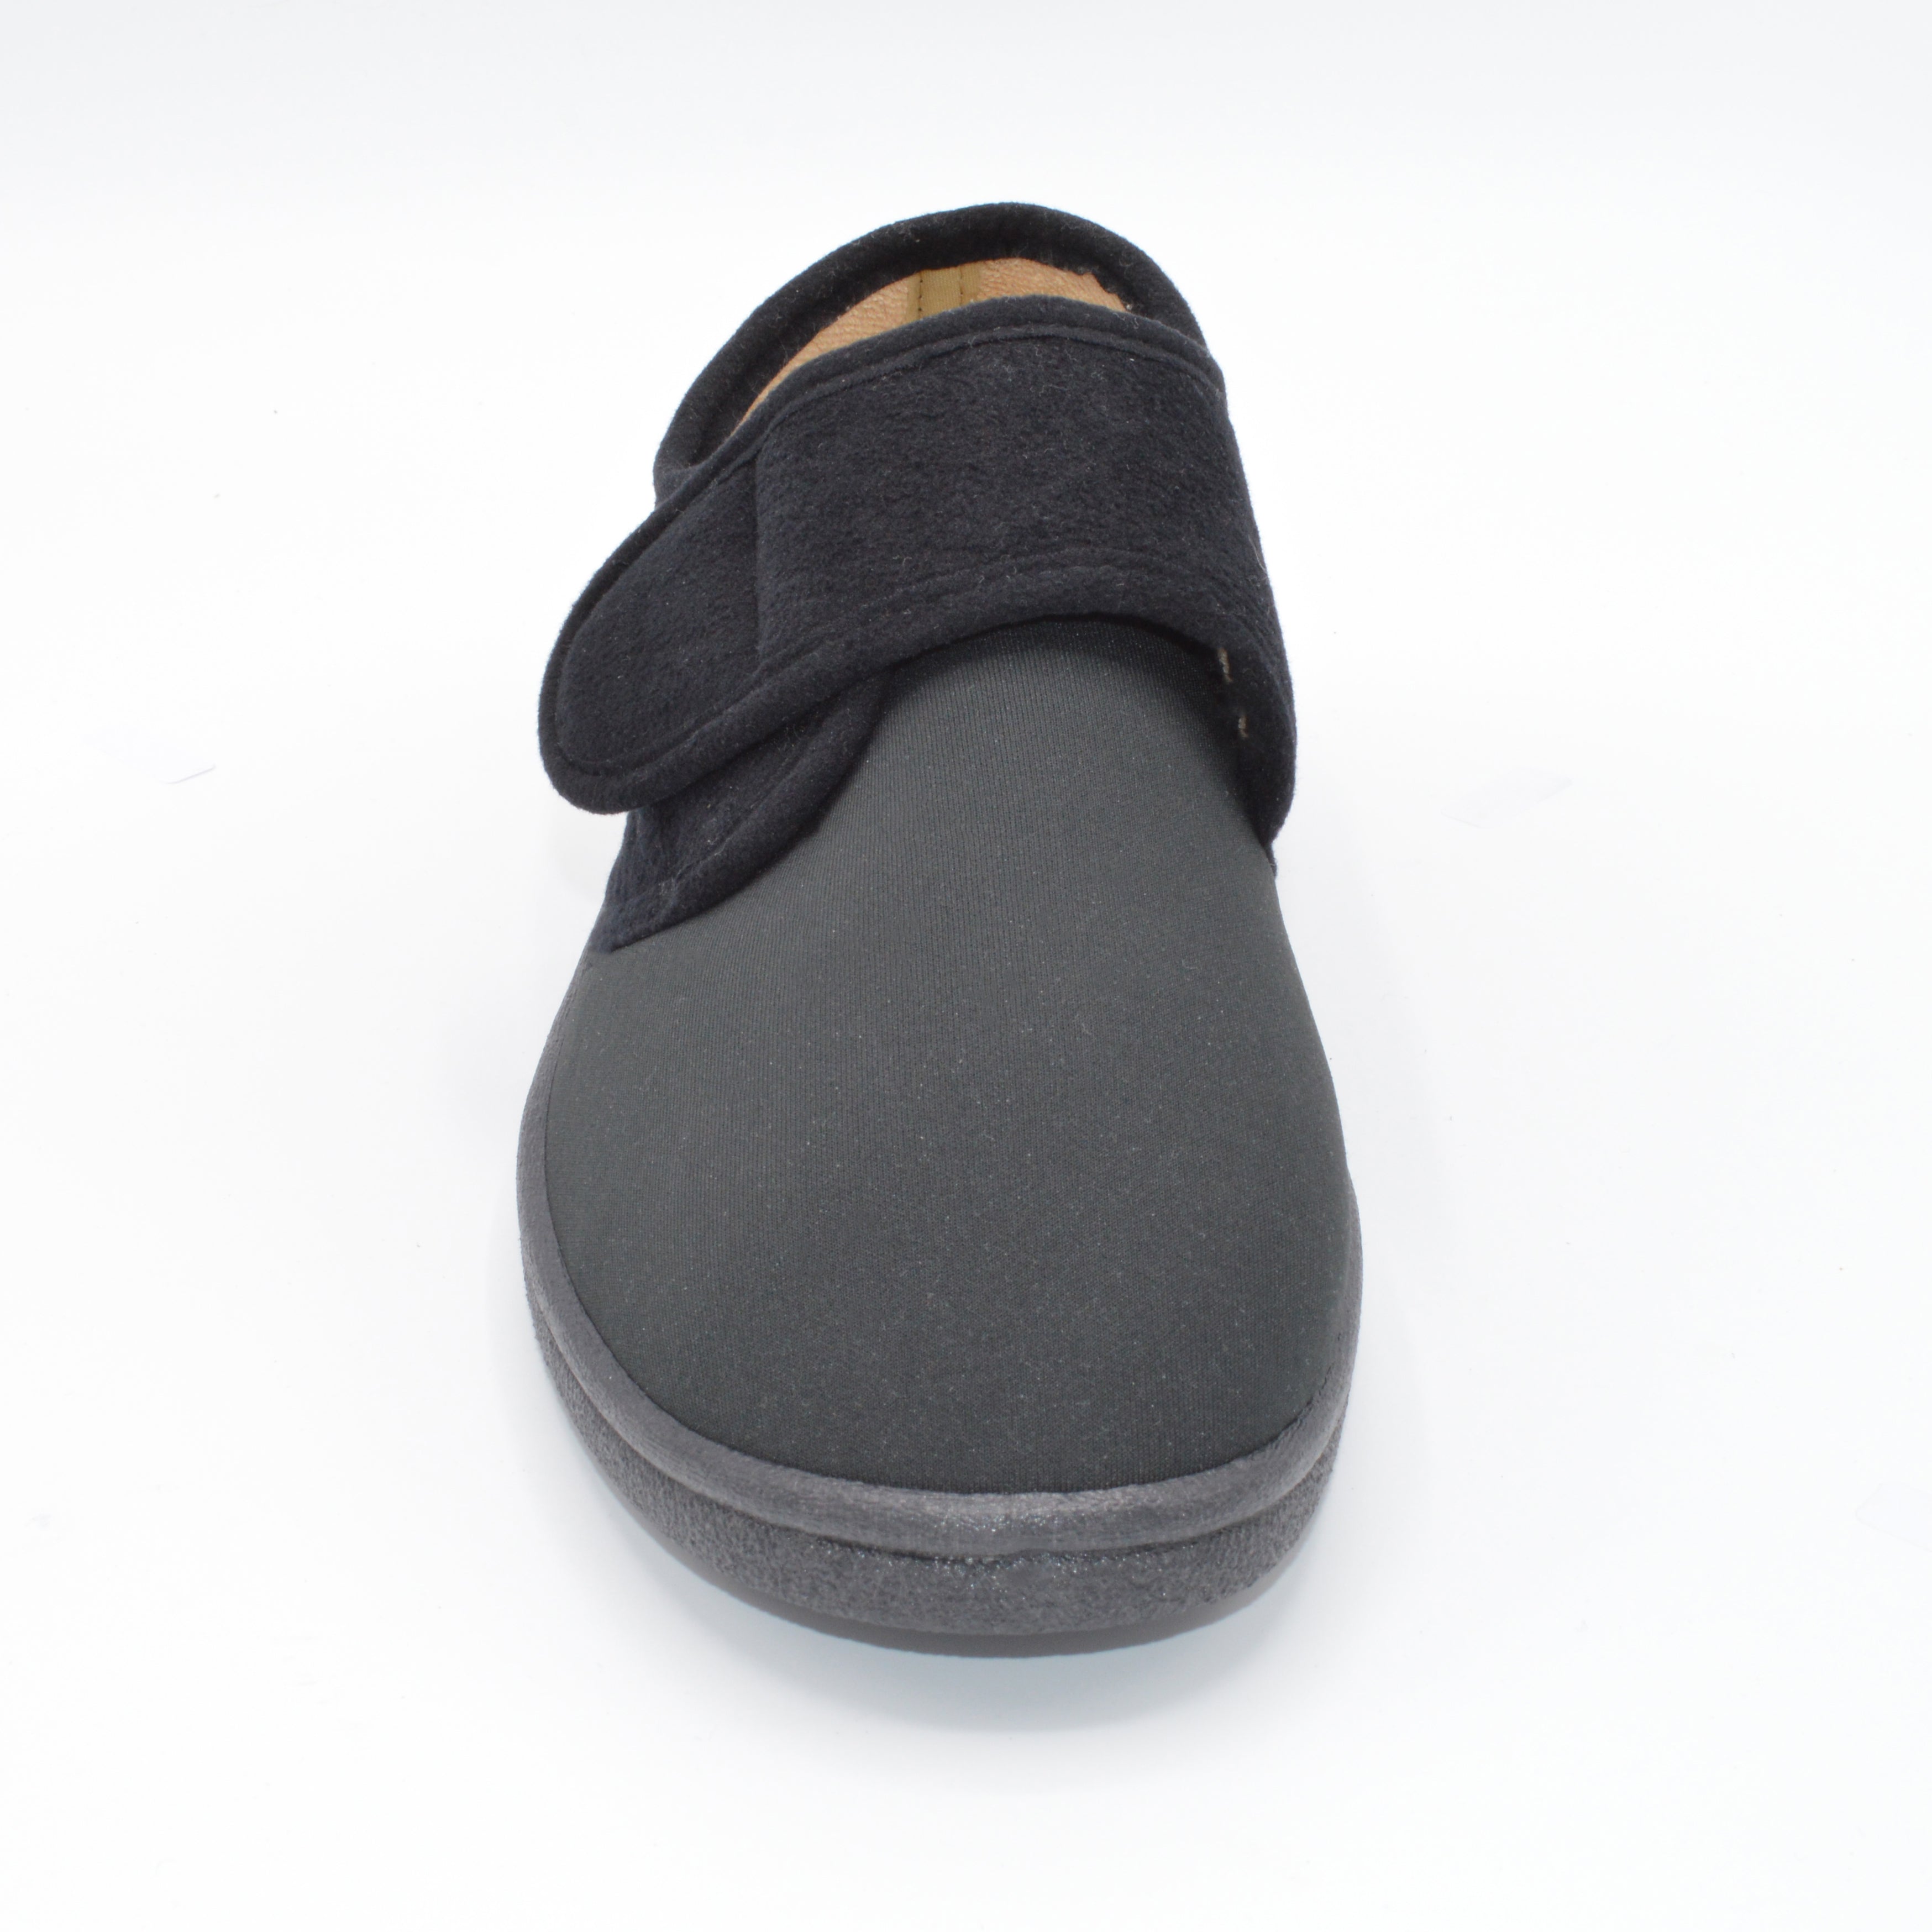 Warm Velcro Wider Fit Slippers For Diabetes